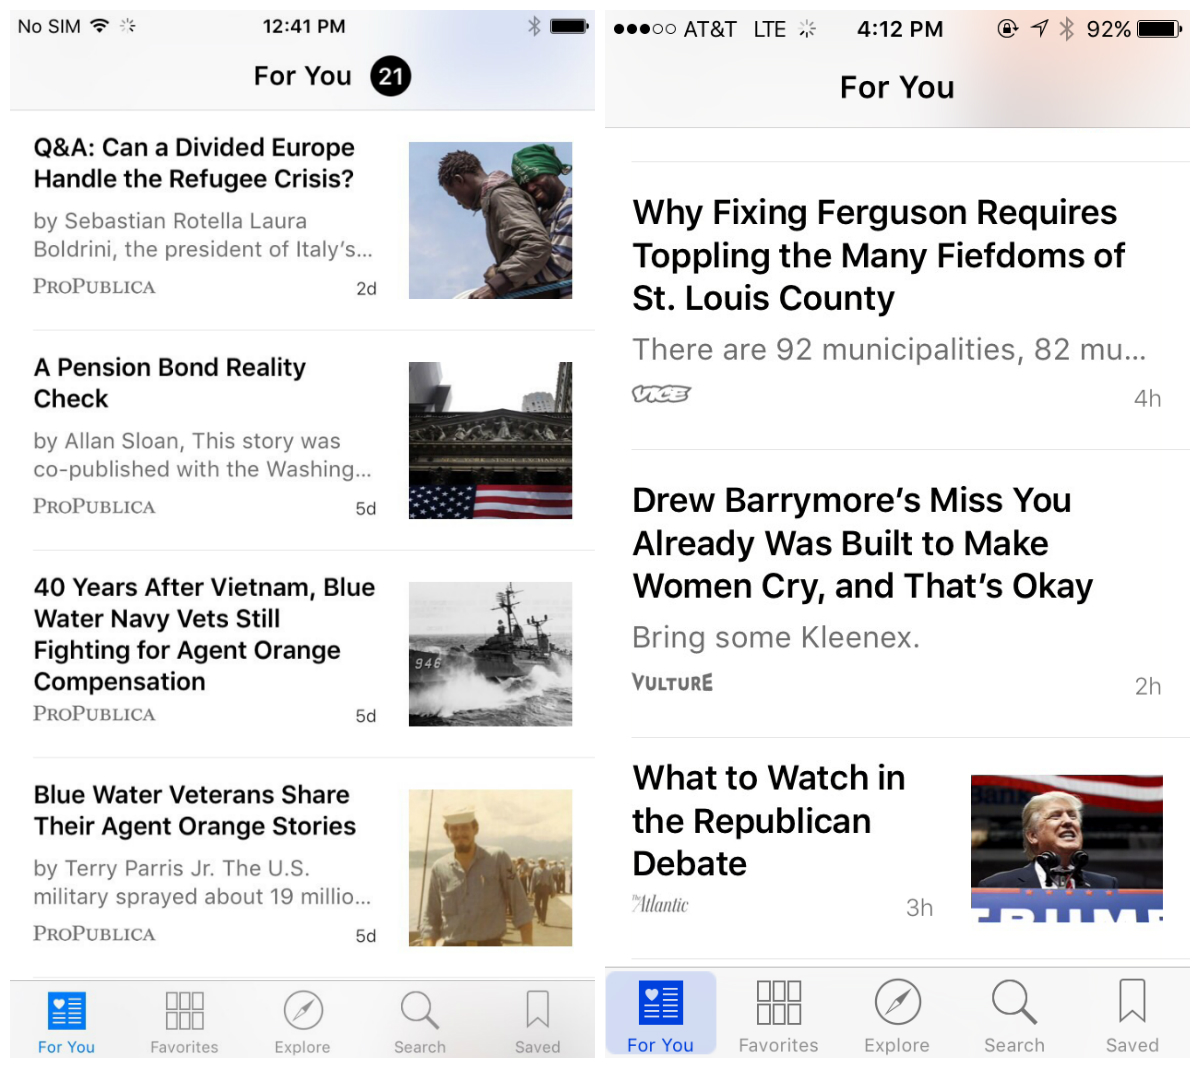 Apple News Is Better Than Newsstand, But That’s Not Saying Much